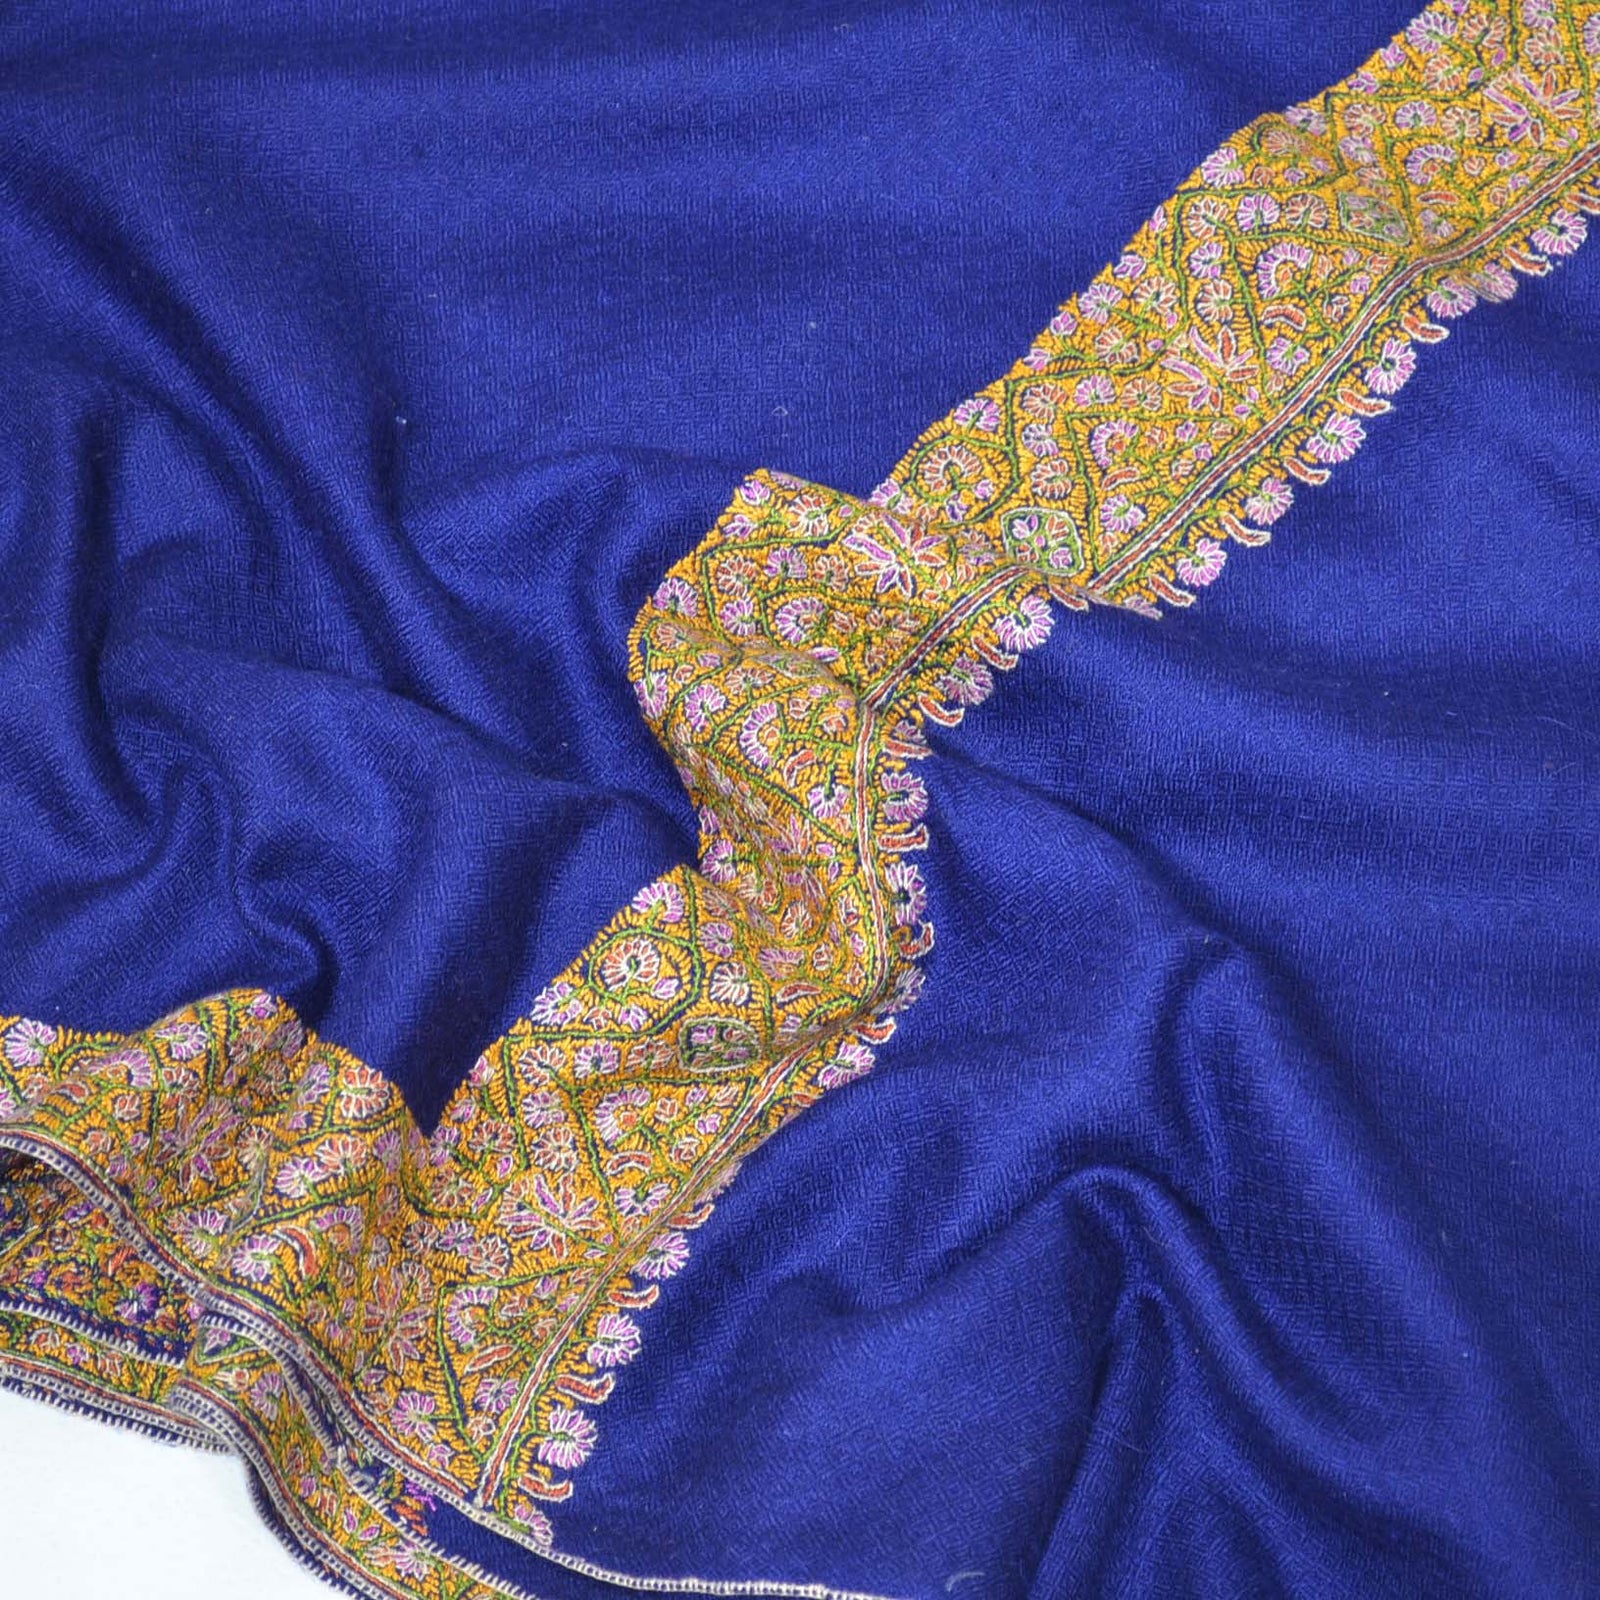 Blue Border Embroidery Cashmere Travel Wrap